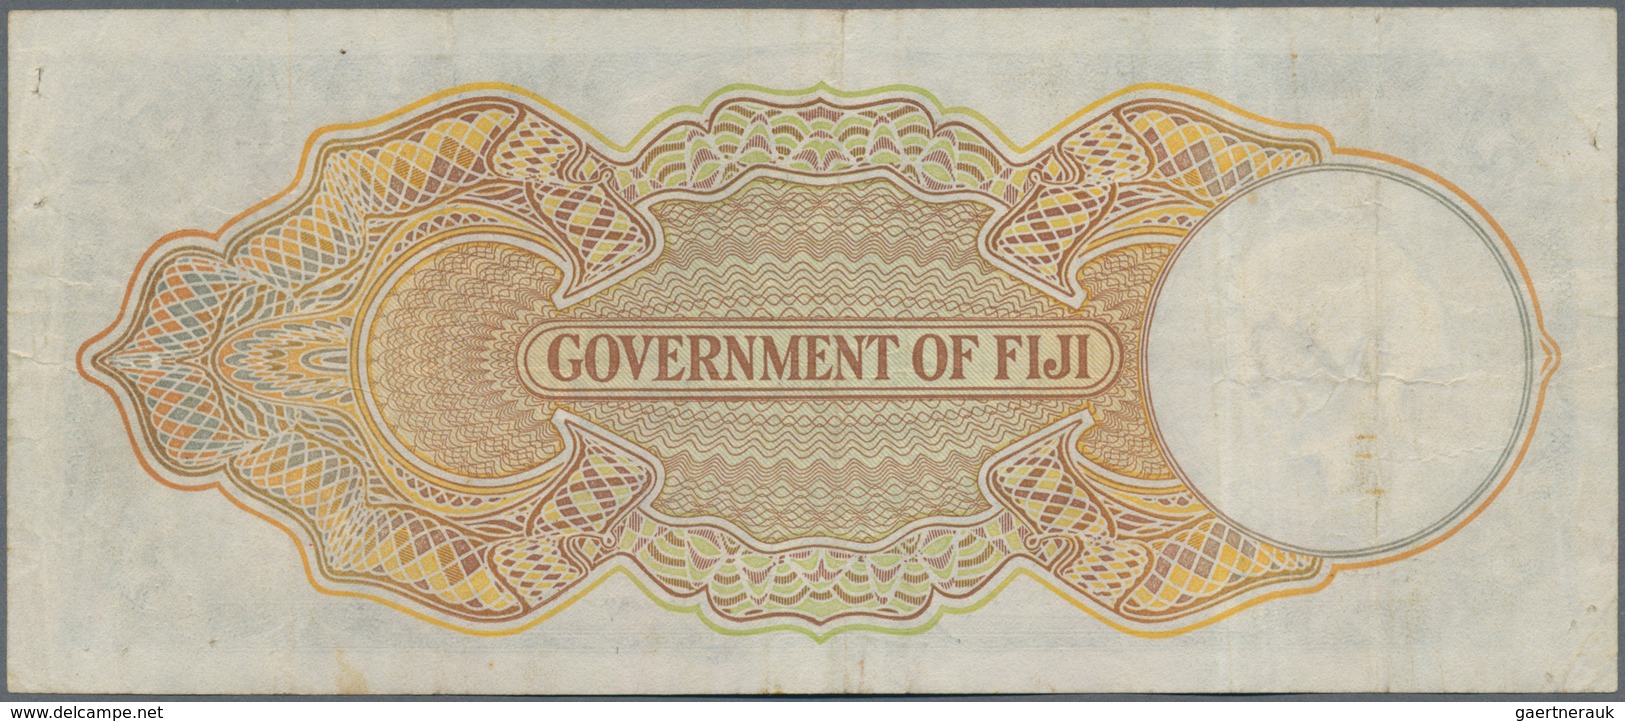 Fiji: 5 Shillings 1938 P. 37b, Used With Light Folds In Paper But No Holes Or Tears, Still Crispness - Figi